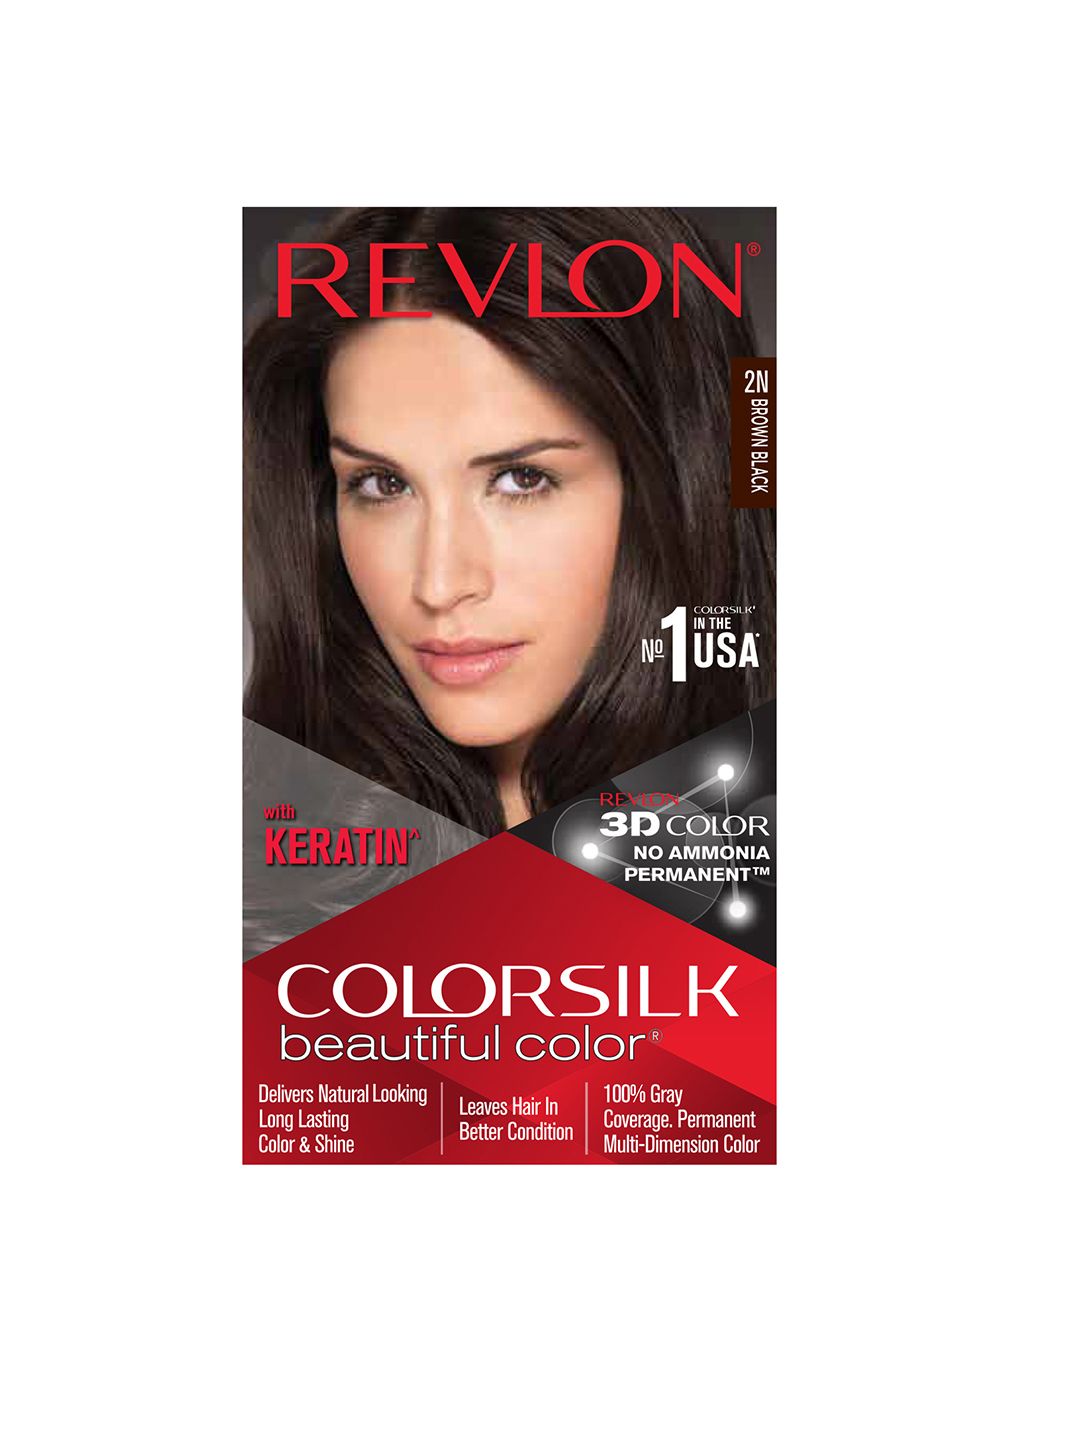 Revlon Color Silk Hair Color with Keratin - Brown Black 2N Price in India